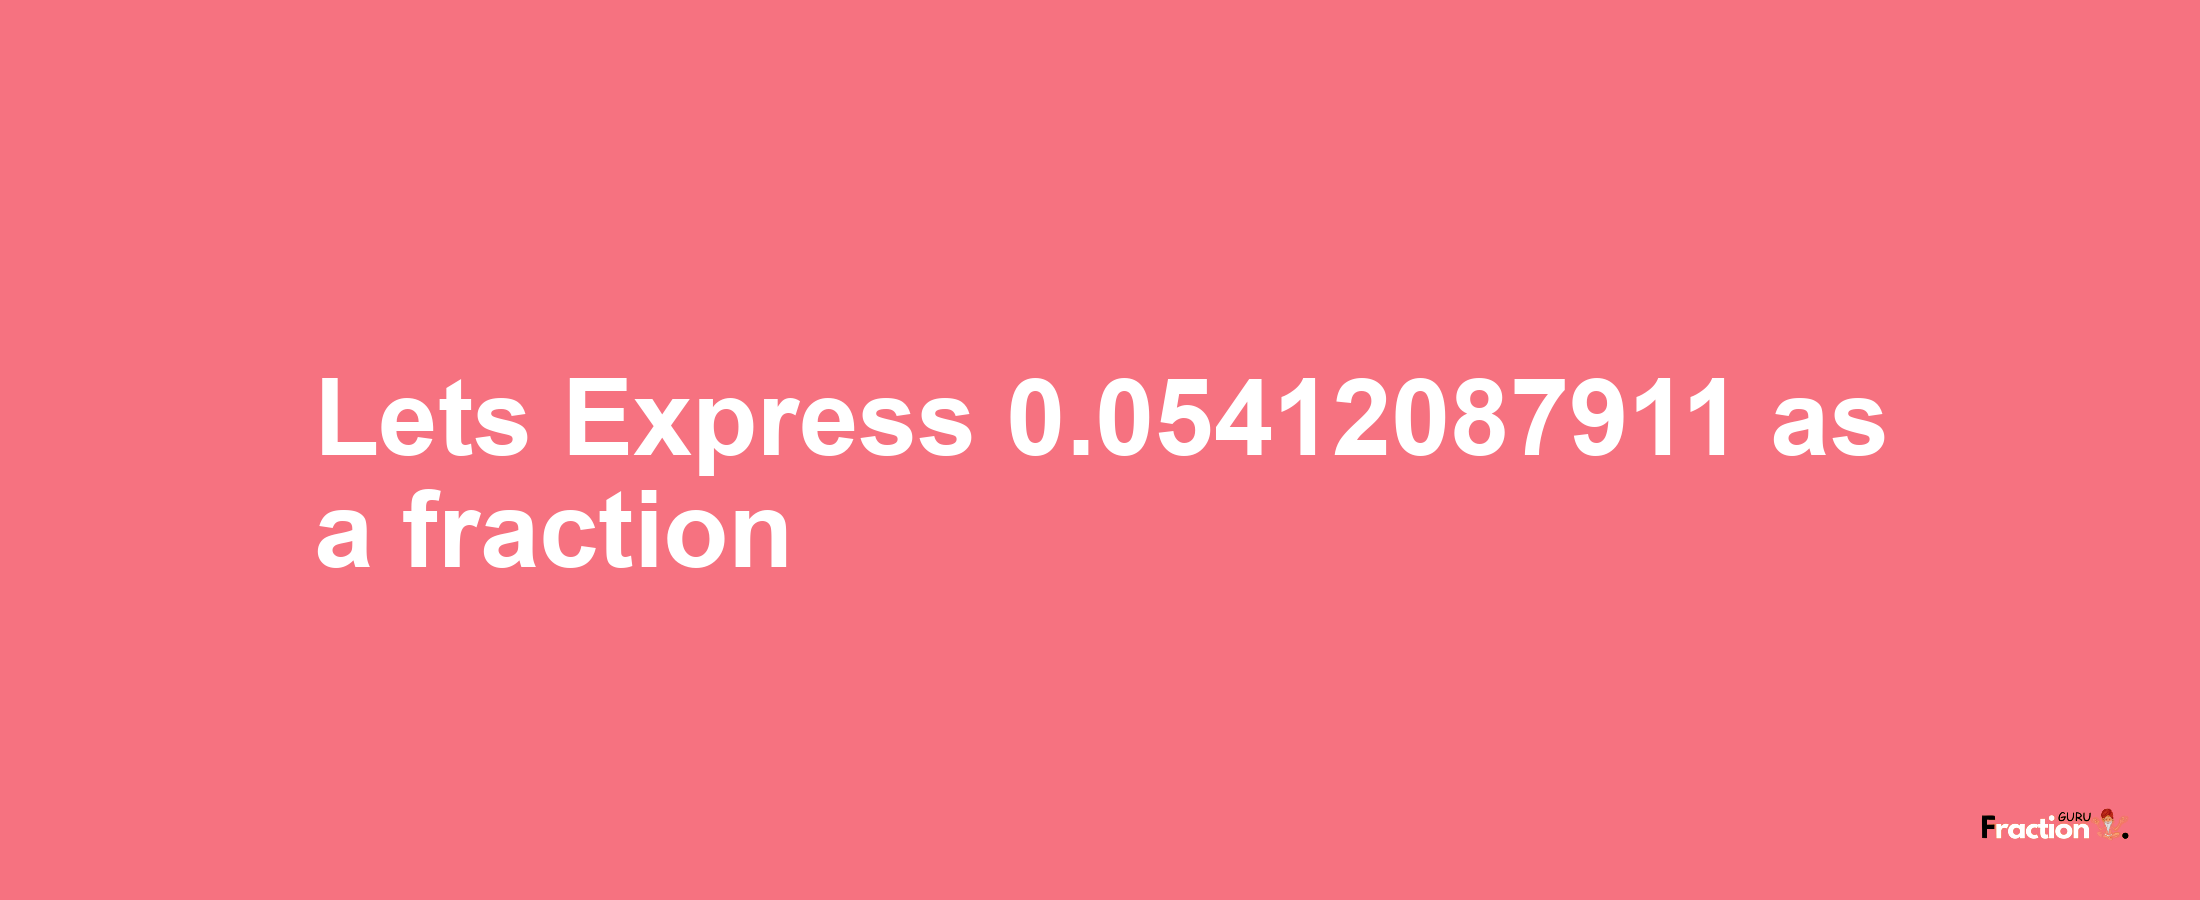 Lets Express 0.05412087911 as afraction